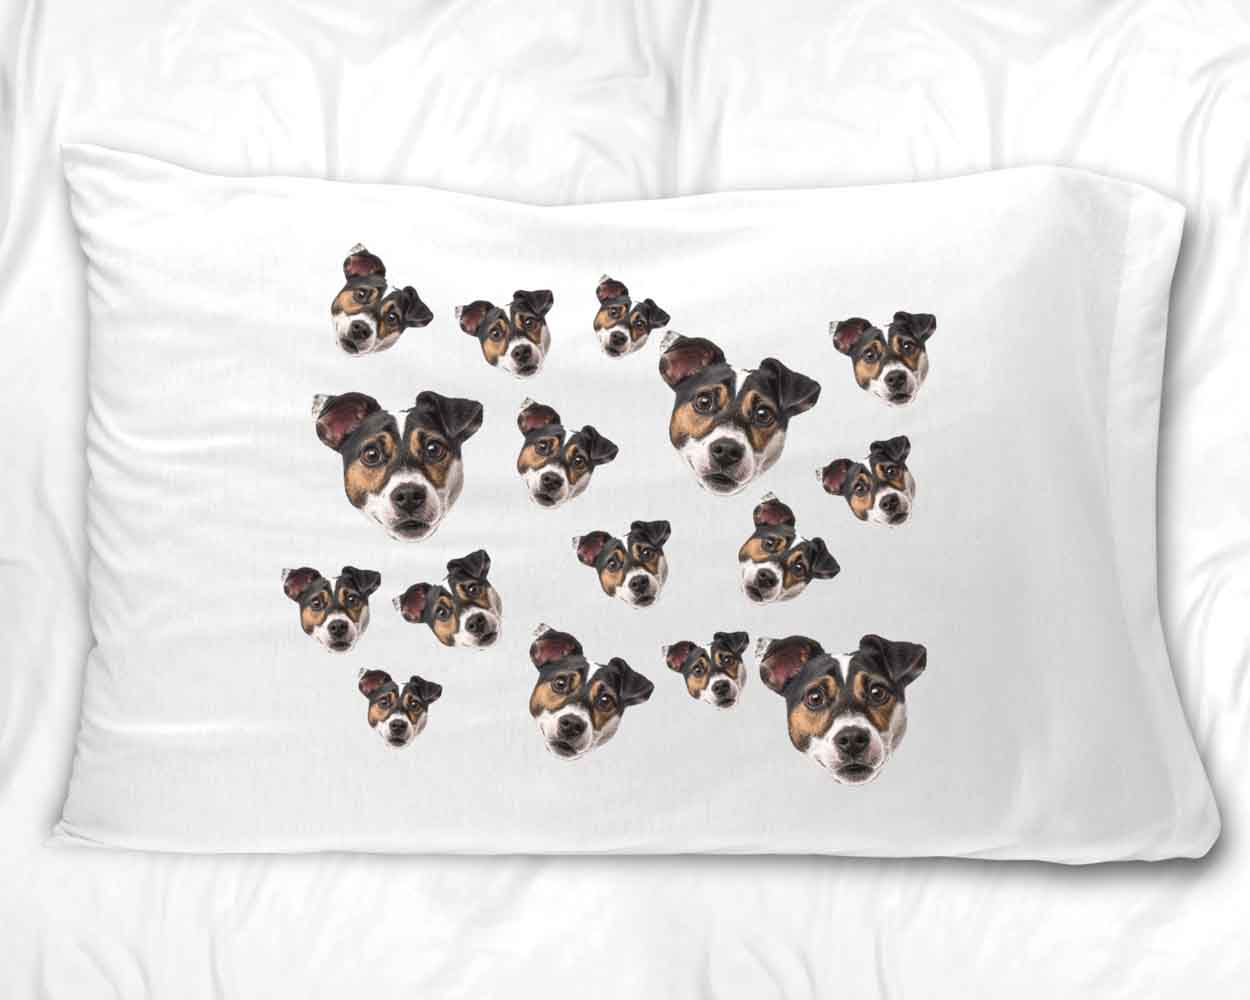 100% standard white cotton pillowcase custom printed and personalized using your photo face cropped  in all over design digitally printed on the pillowcase makes a fun gift idea.